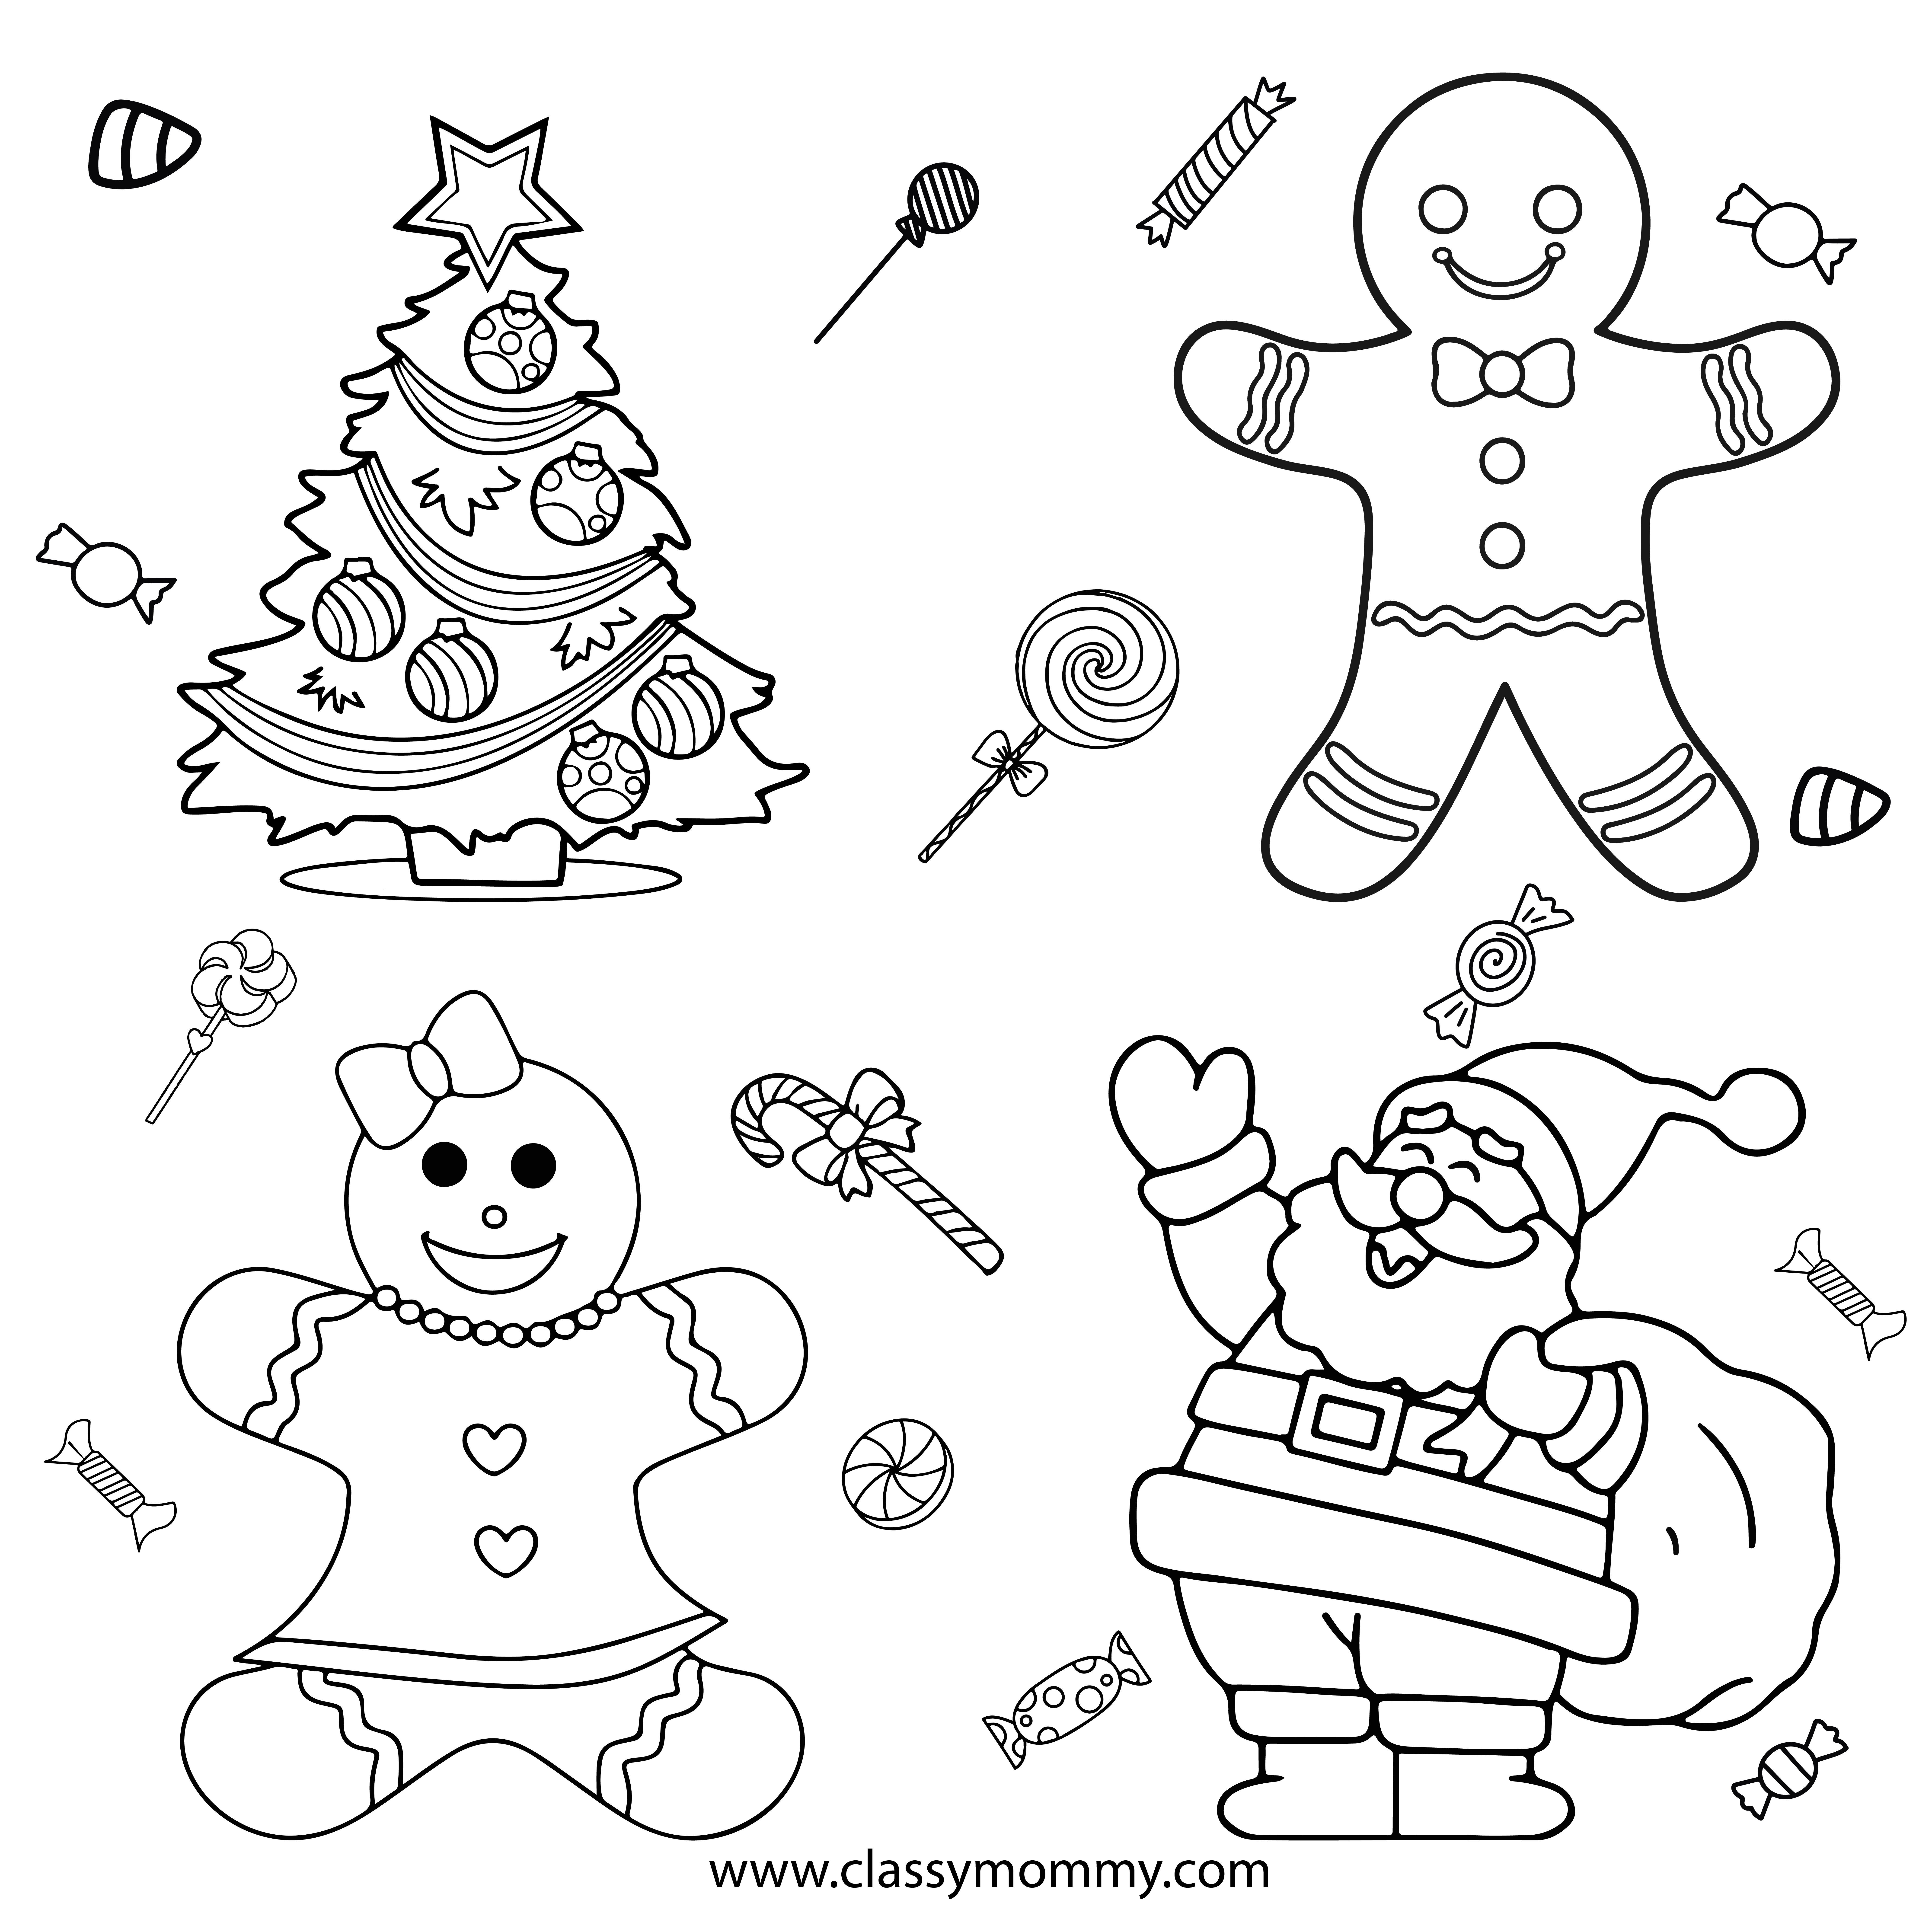 Free Printable Gingerbread Coloring Pages   Classy Mommy